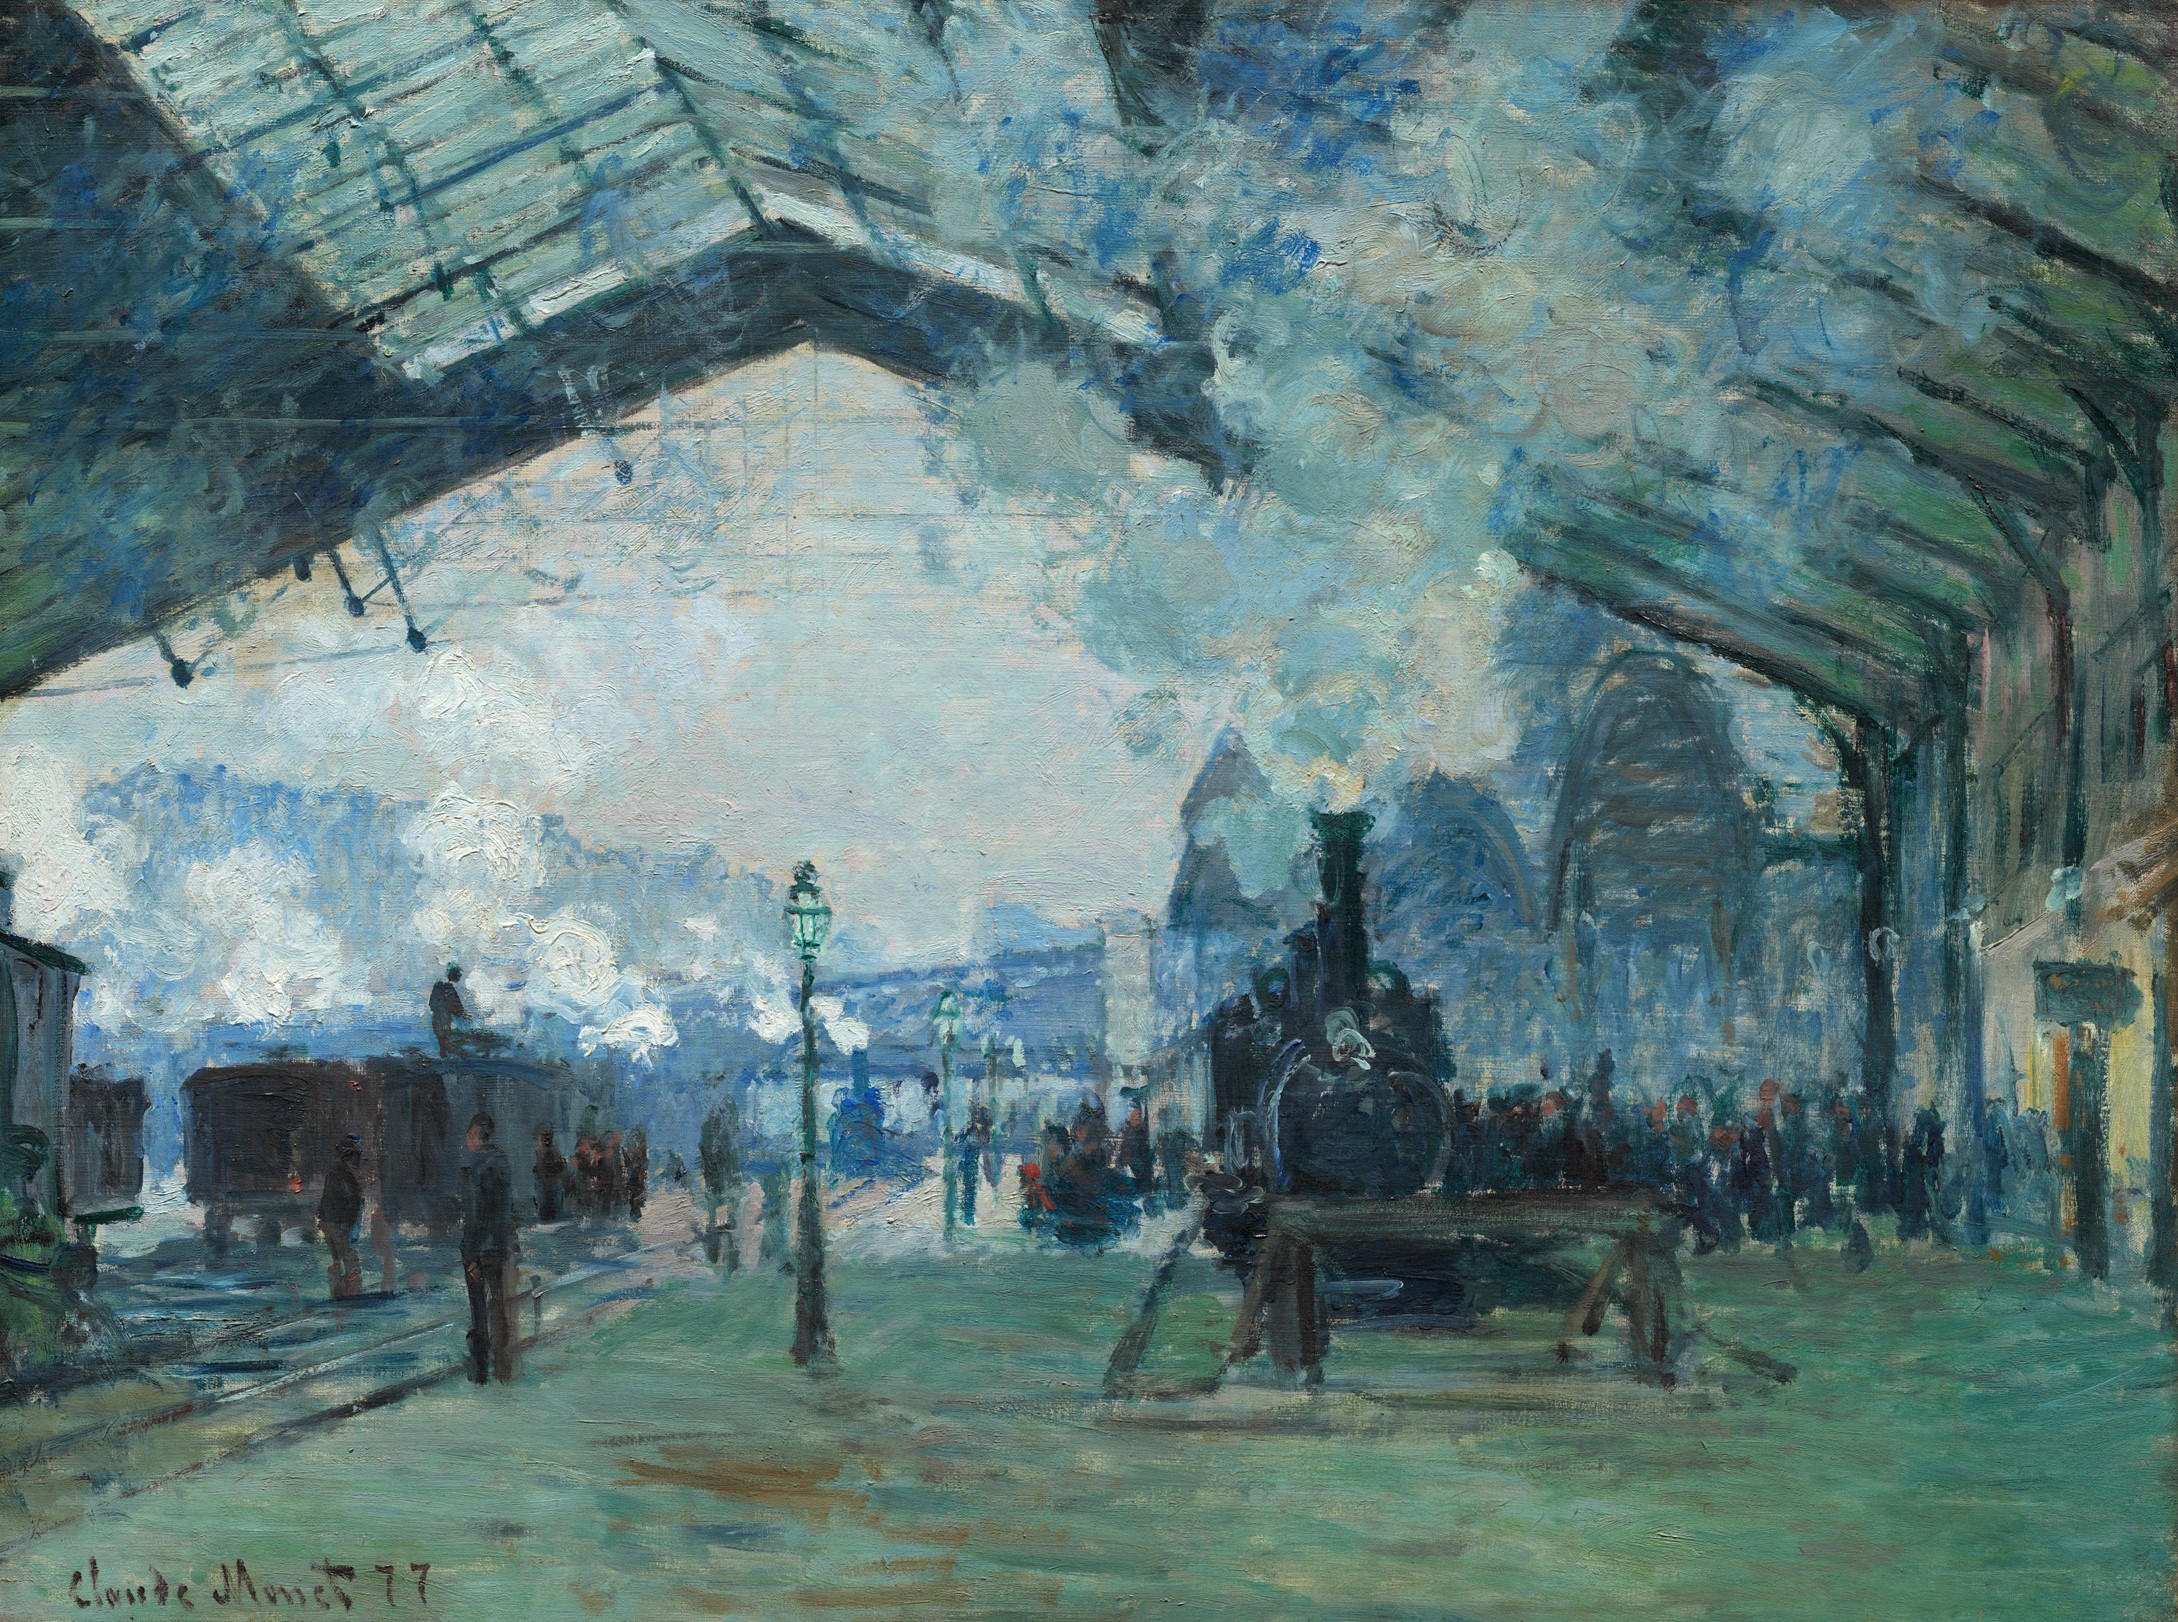 Impressionism: An Exhibit Beyond Classic Characterization NUVO DE February 15